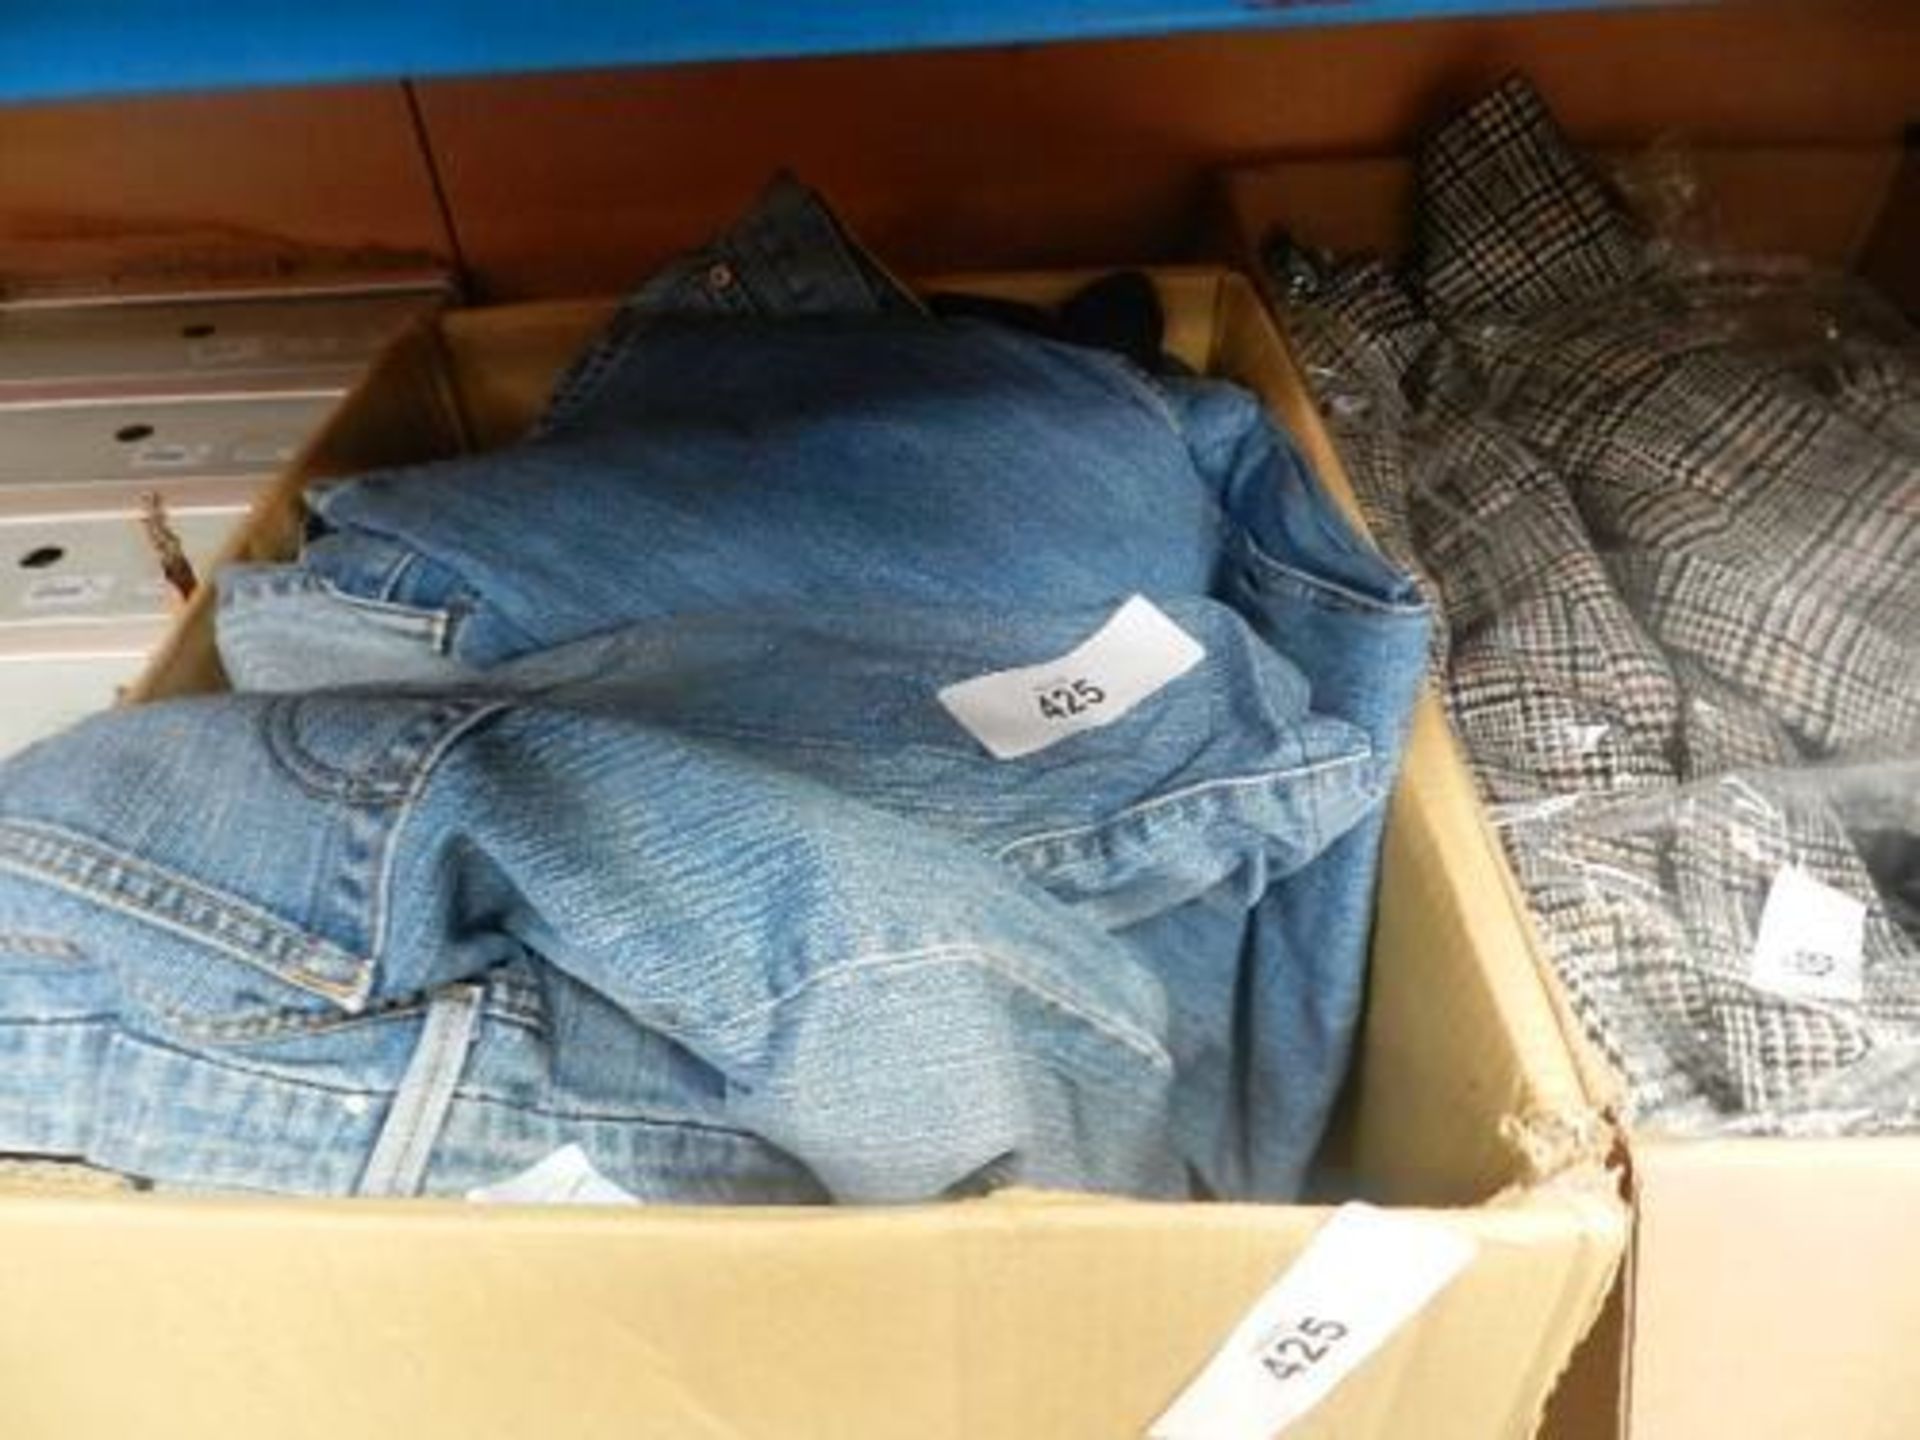 Approximately 20 x pairs of Levi jeans, various sizes and styles, all laundered - Second-hand,